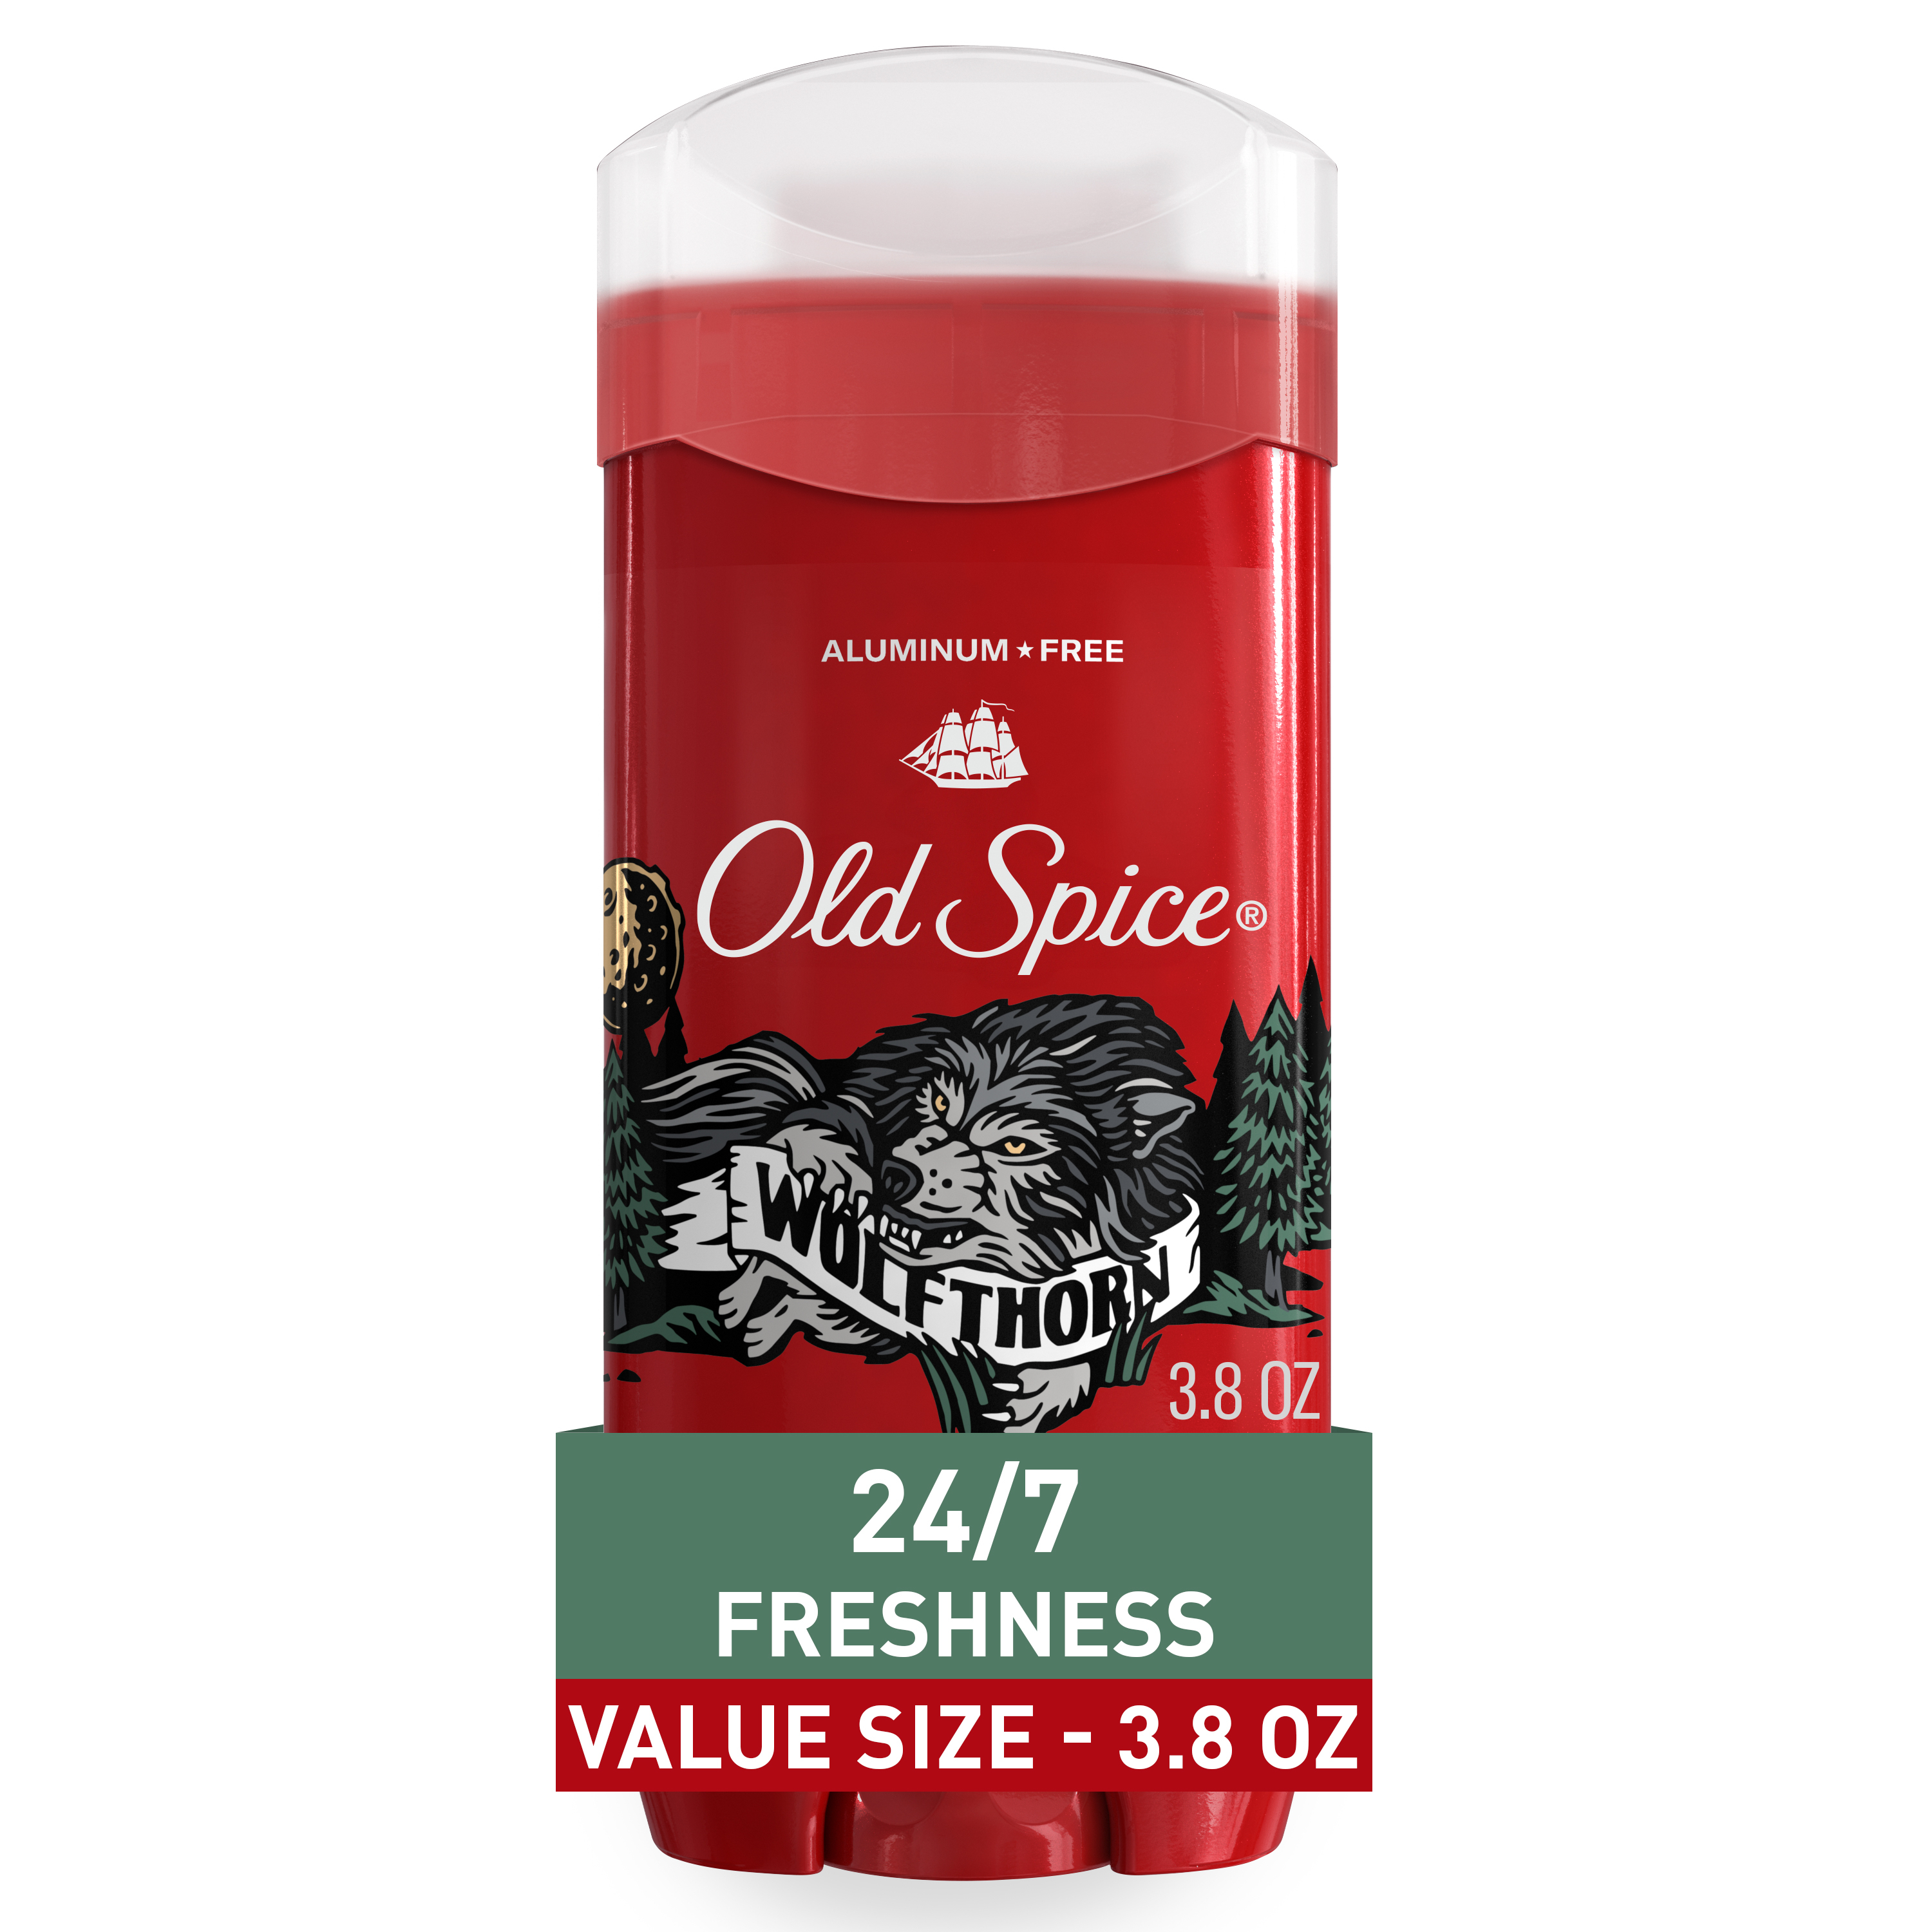 Old Spice Aluminum Free Deodorant for Men, Wolfthorn, 48 Hr. Protection, 3.8 oz - image 1 of 8